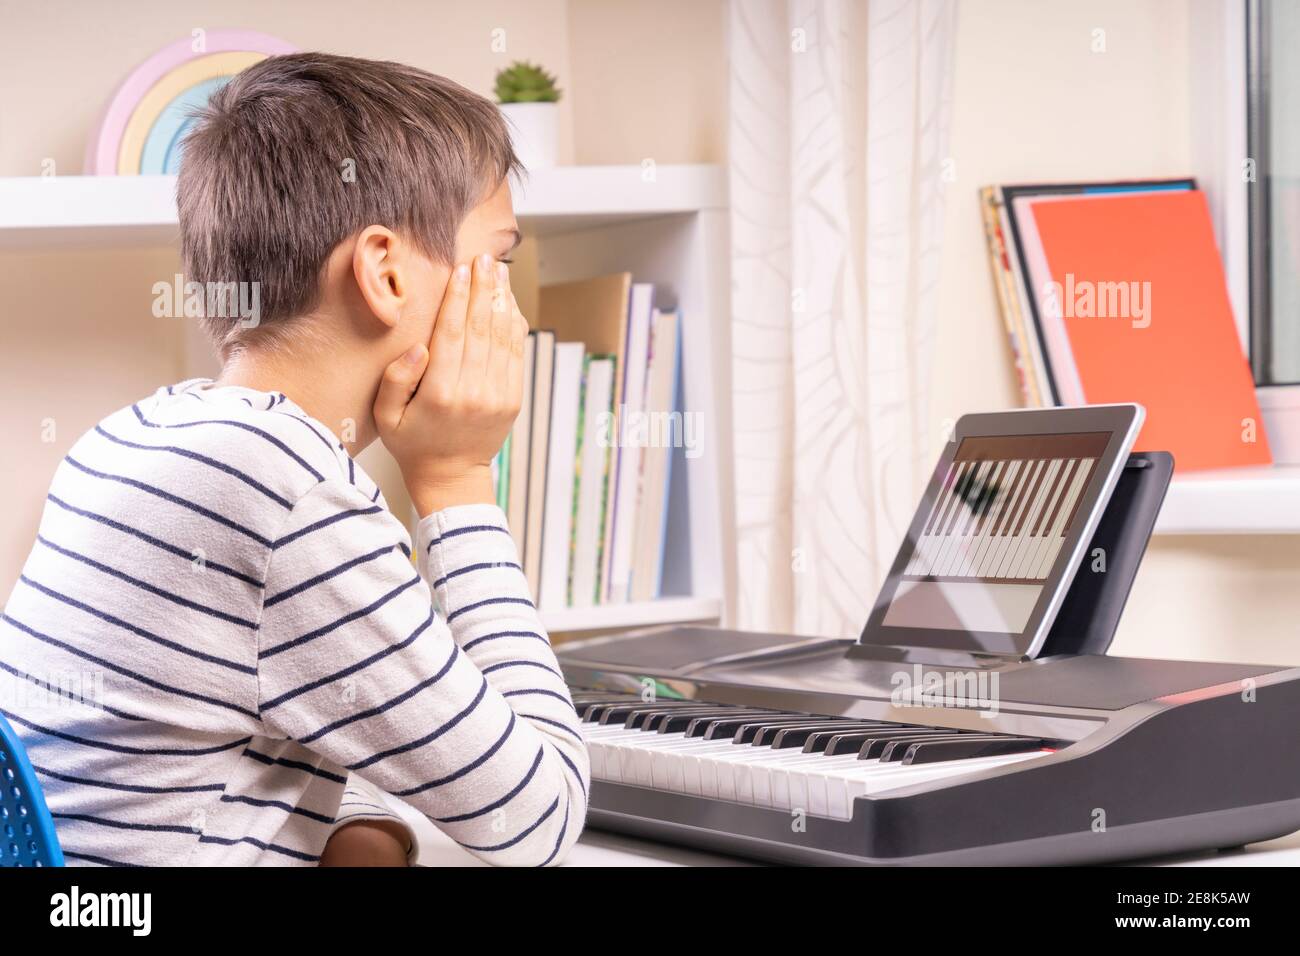 Teenage boy watching video lesson at tablet computer and learing playing digital piano at home. Online learning remote education Stock Photo